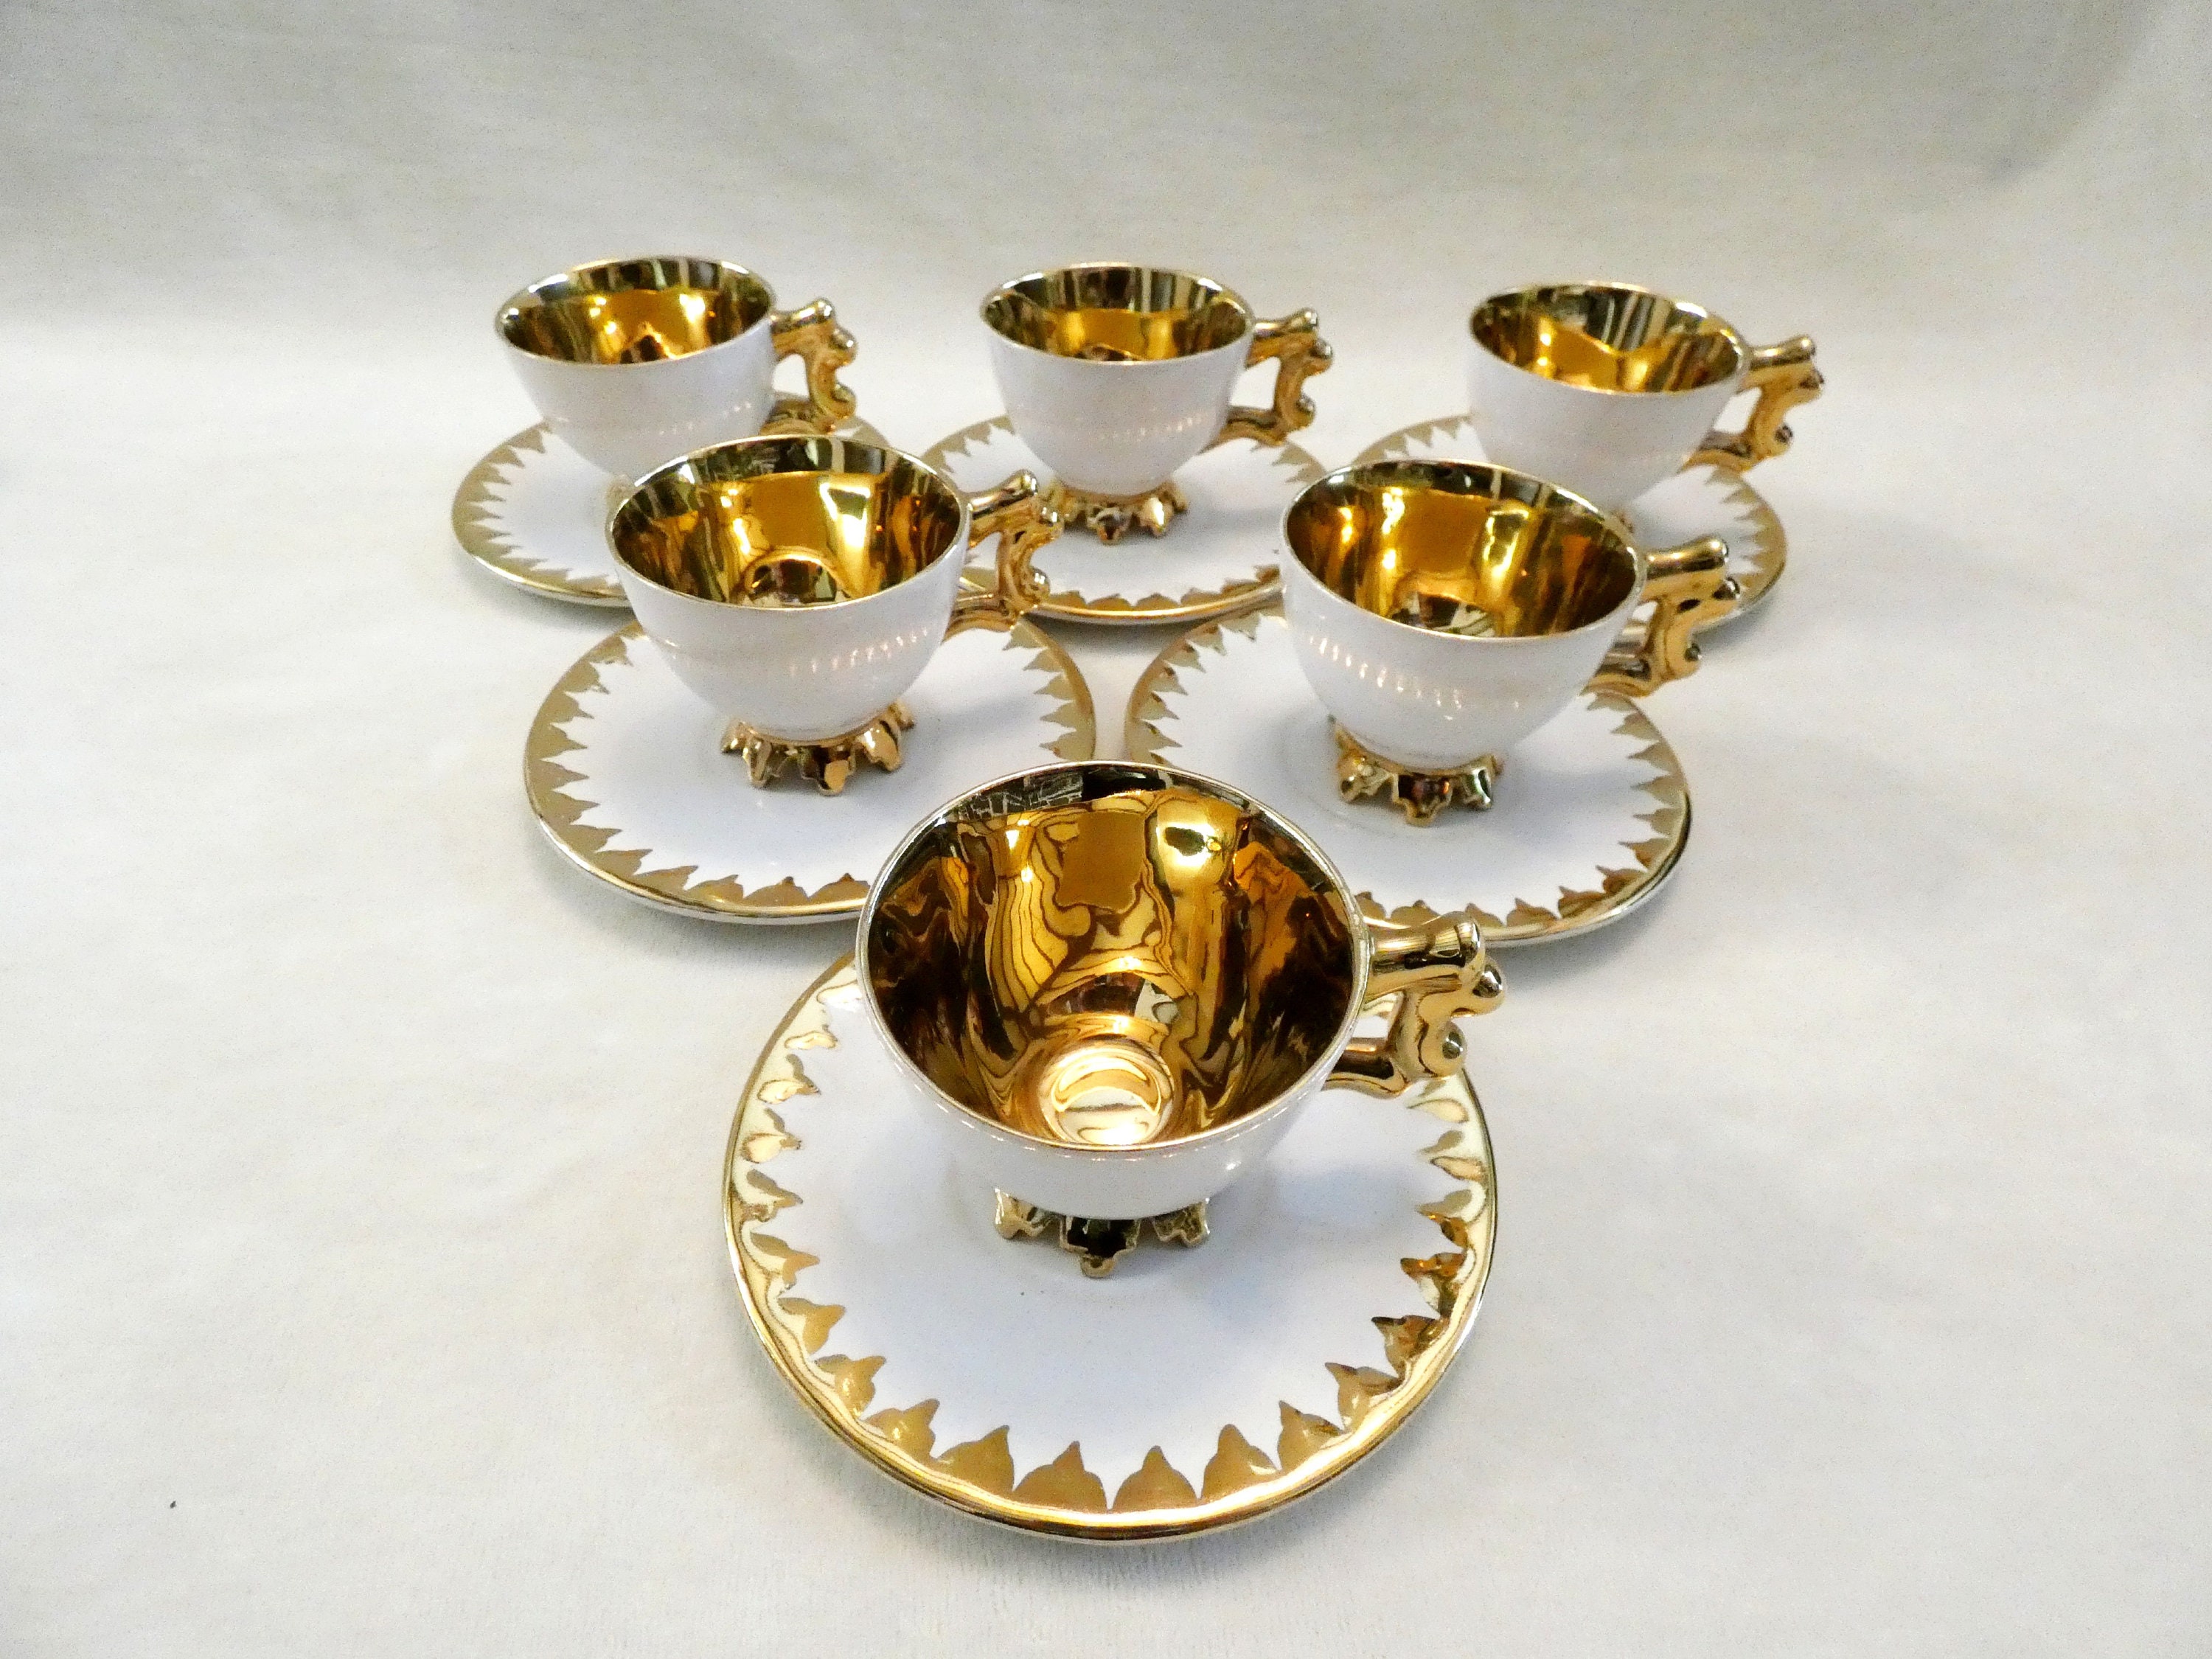 6 Antique Italian Coffee Cups and Saucers, Vintage White and 22k Gold Coffee  Set, Rare Vintage Espresso Cups, Italy 30s